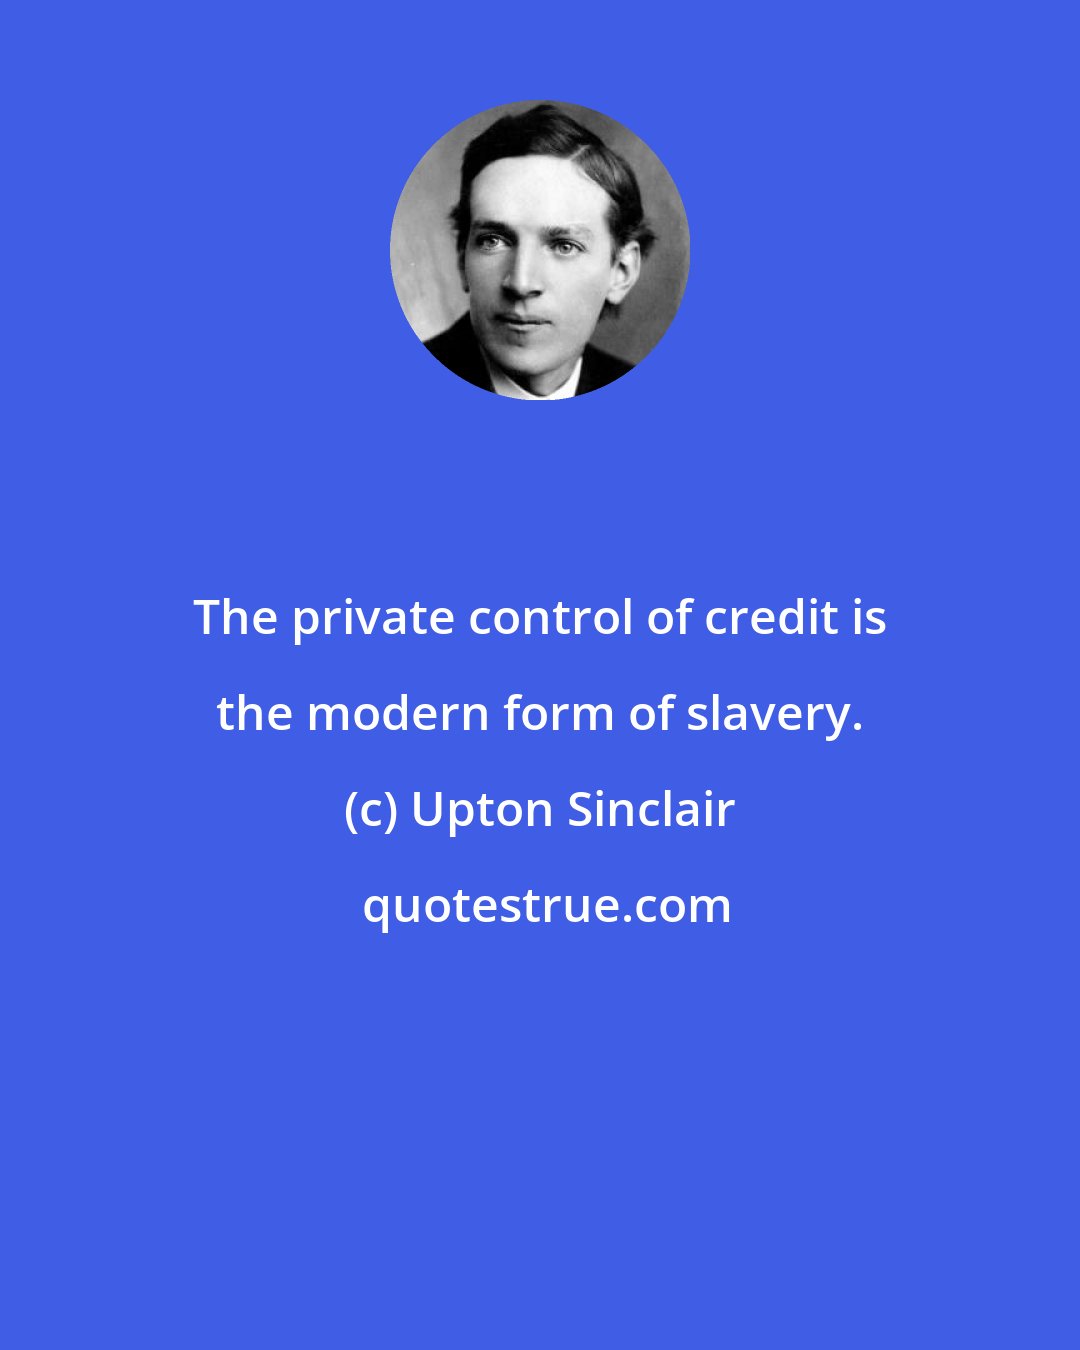 Upton Sinclair: The private control of credit is the modern form of slavery.